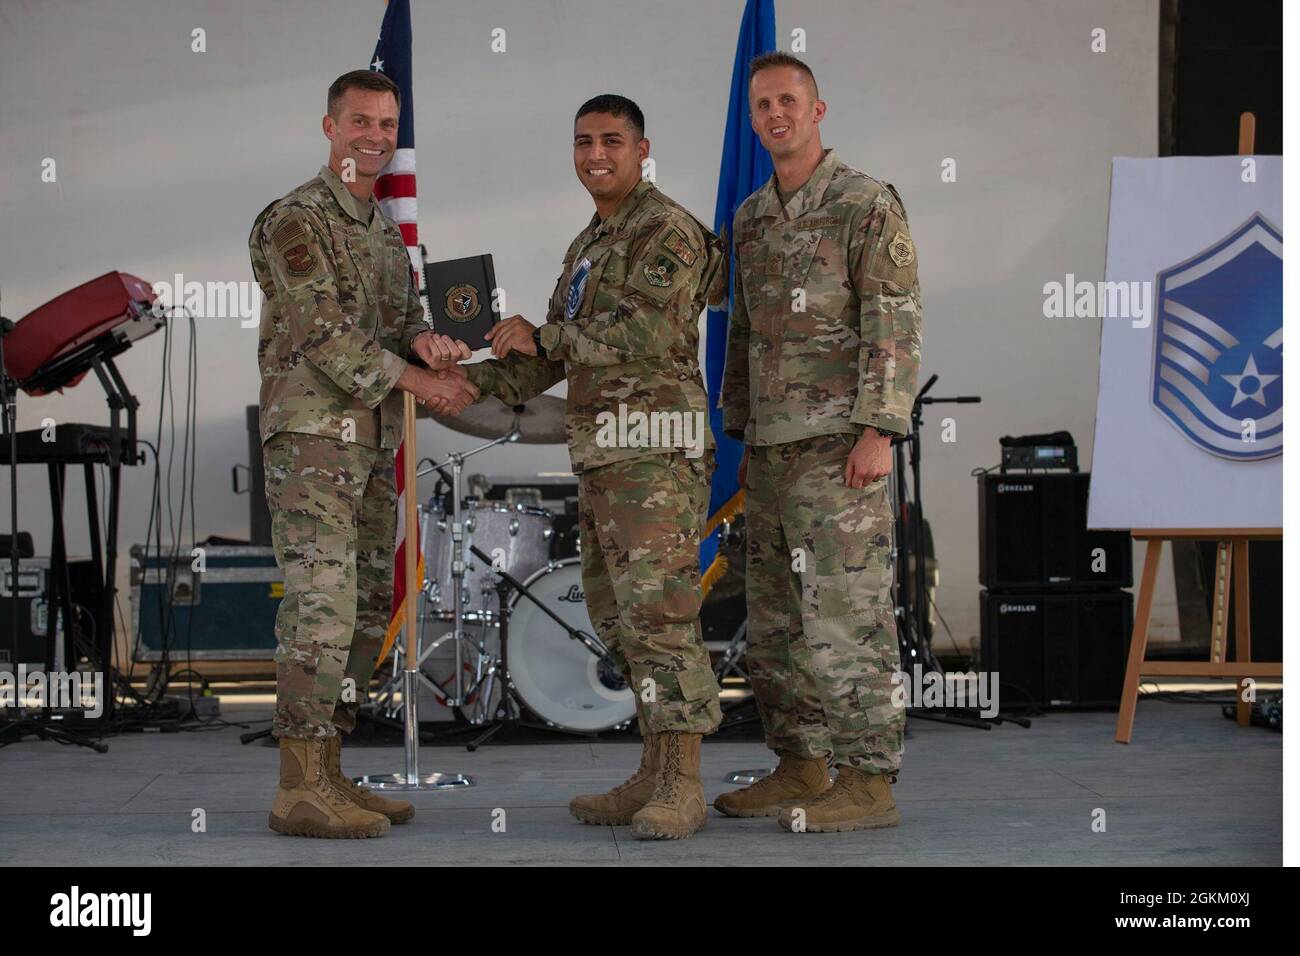 U.S. Air Force Brig. Gen. Larry R. Broadwell, 380th Air Expeditionary Wing commander (AEW), and Chief Master Sgt. Joshua J. Wiener, 380th AEW command chief, pose with Tech. Sgt. Carlos Gomez, 380th Expeditionary Civil Engineer Squadron, at Al Dhafra Air Base (ADAB), United Arab Emirates, May 21, 2021. Gomez is one of 19 team ADAB technical sergeants that were selected for promoted to master sergeant this year. Stock Photo